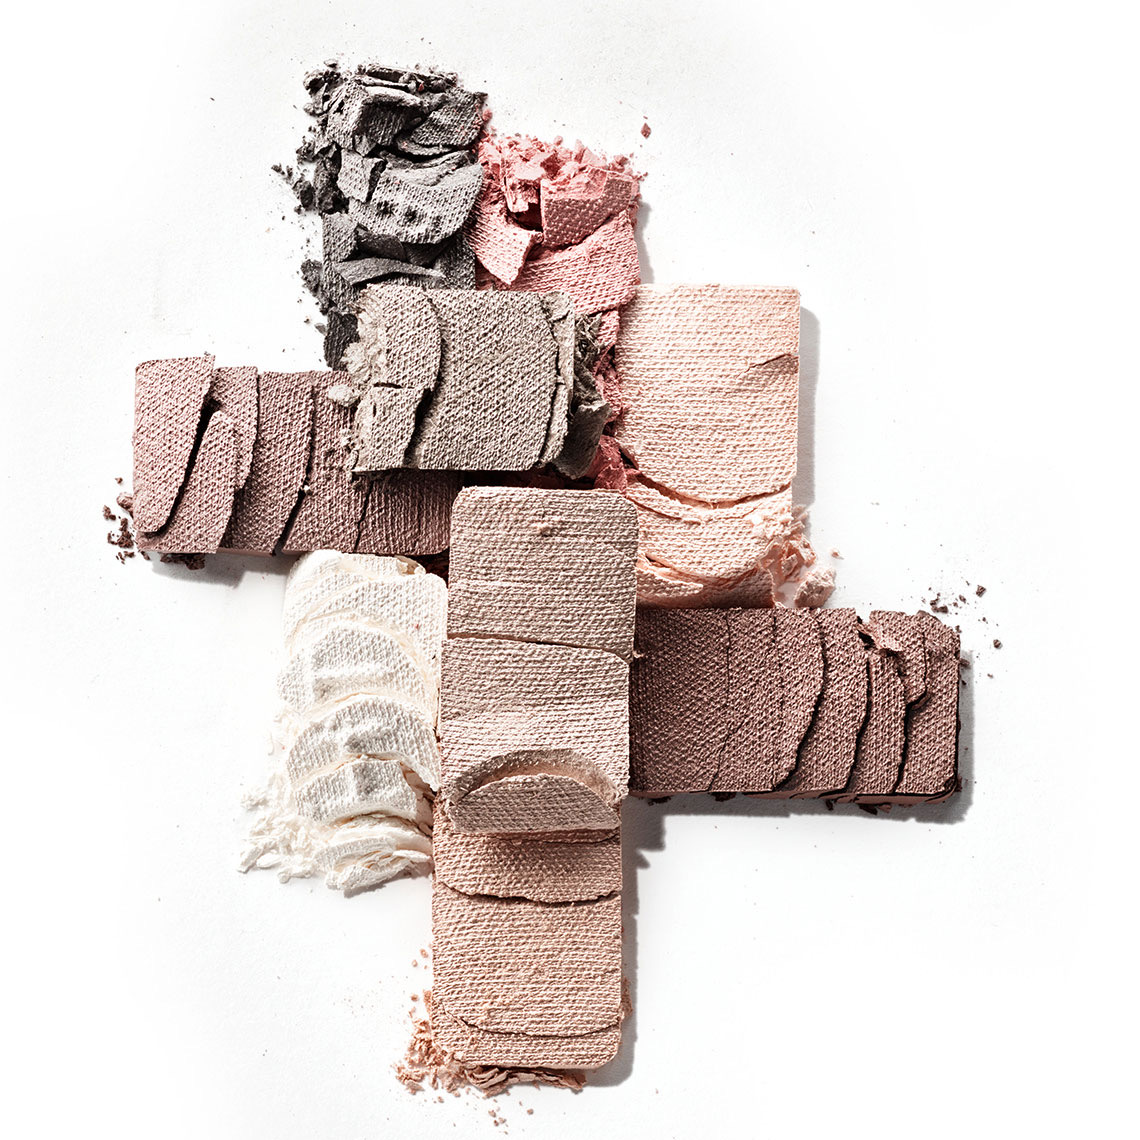 cosmetic art eyeshadow collage  • Marc Wuchner • Cosmetic and Texture Photographer